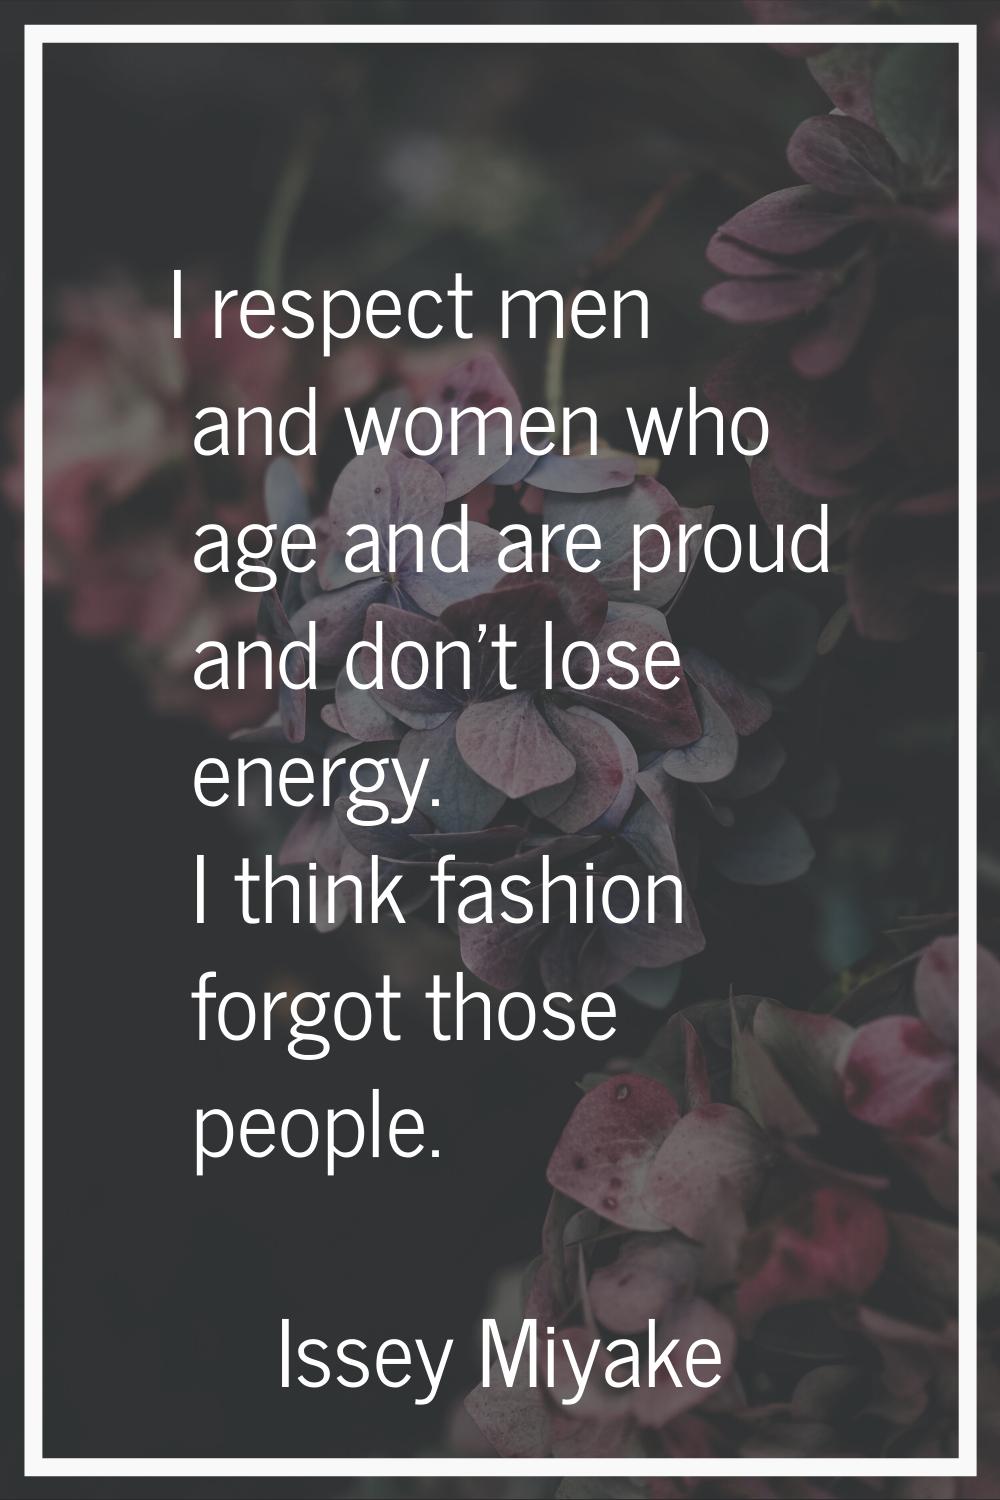 I respect men and women who age and are proud and don't lose energy. I think fashion forgot those p